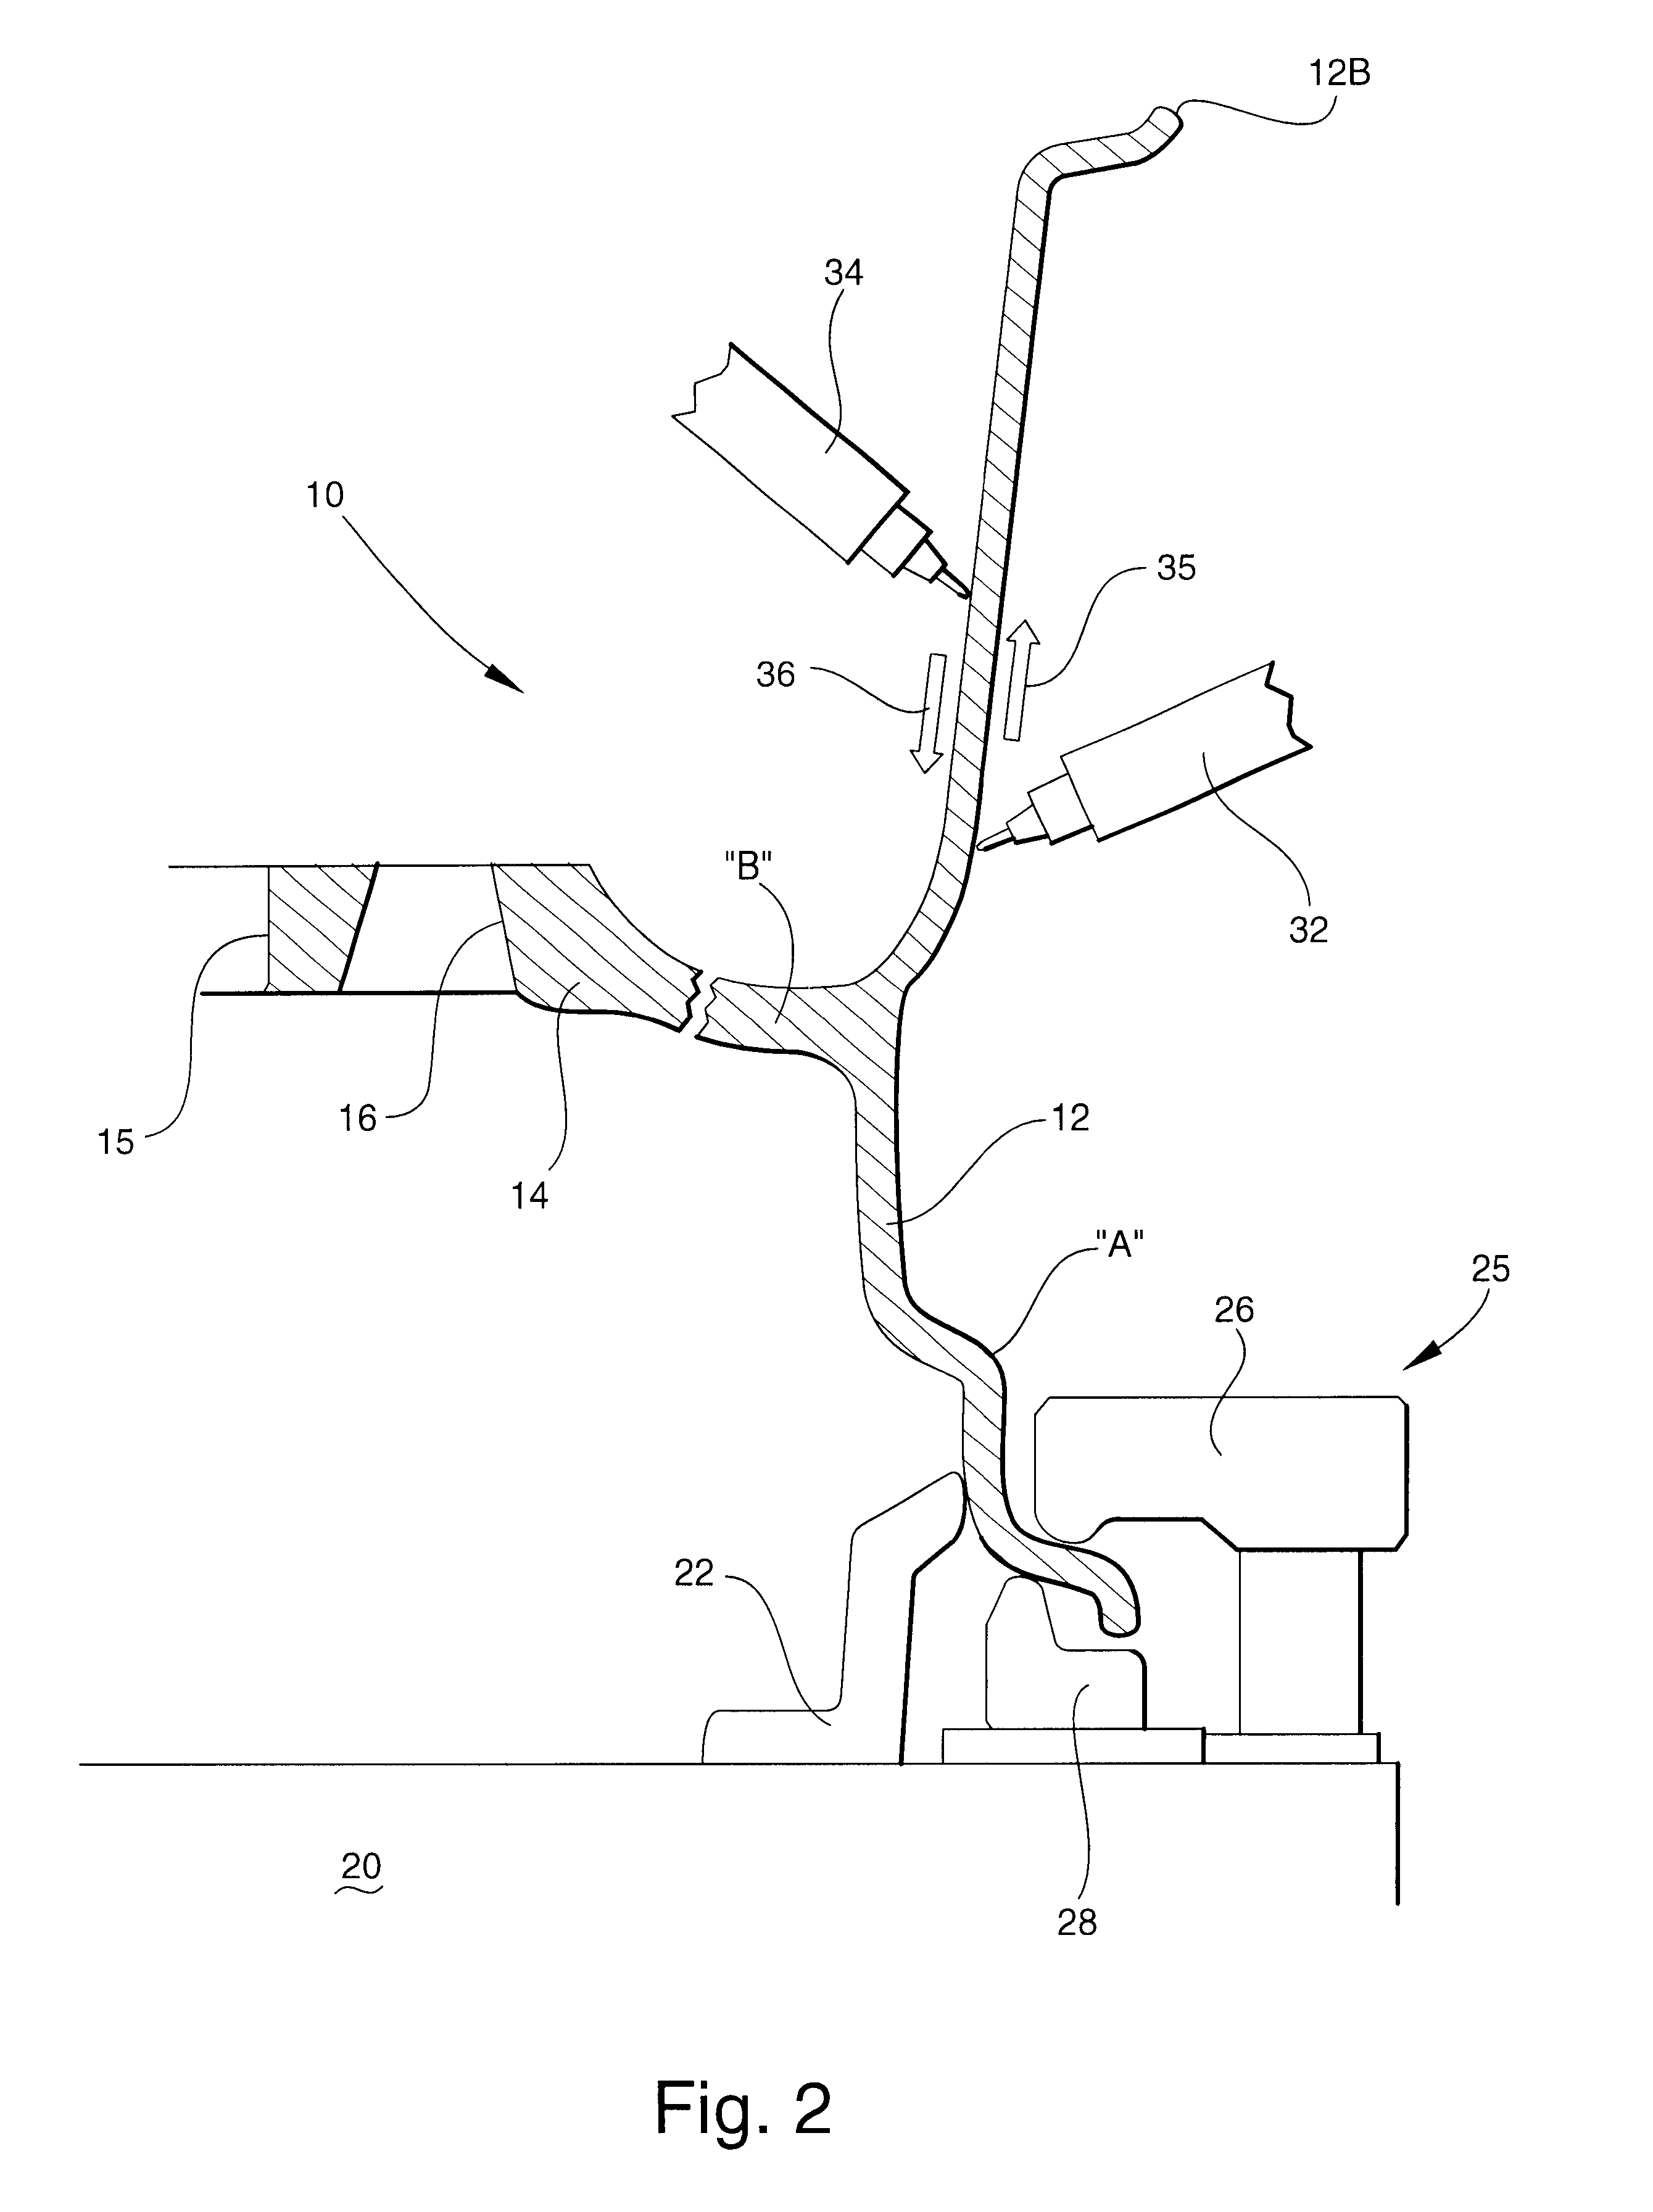 Method of manufacturing a wheel rim for a two-piece vehicle wheel assembly